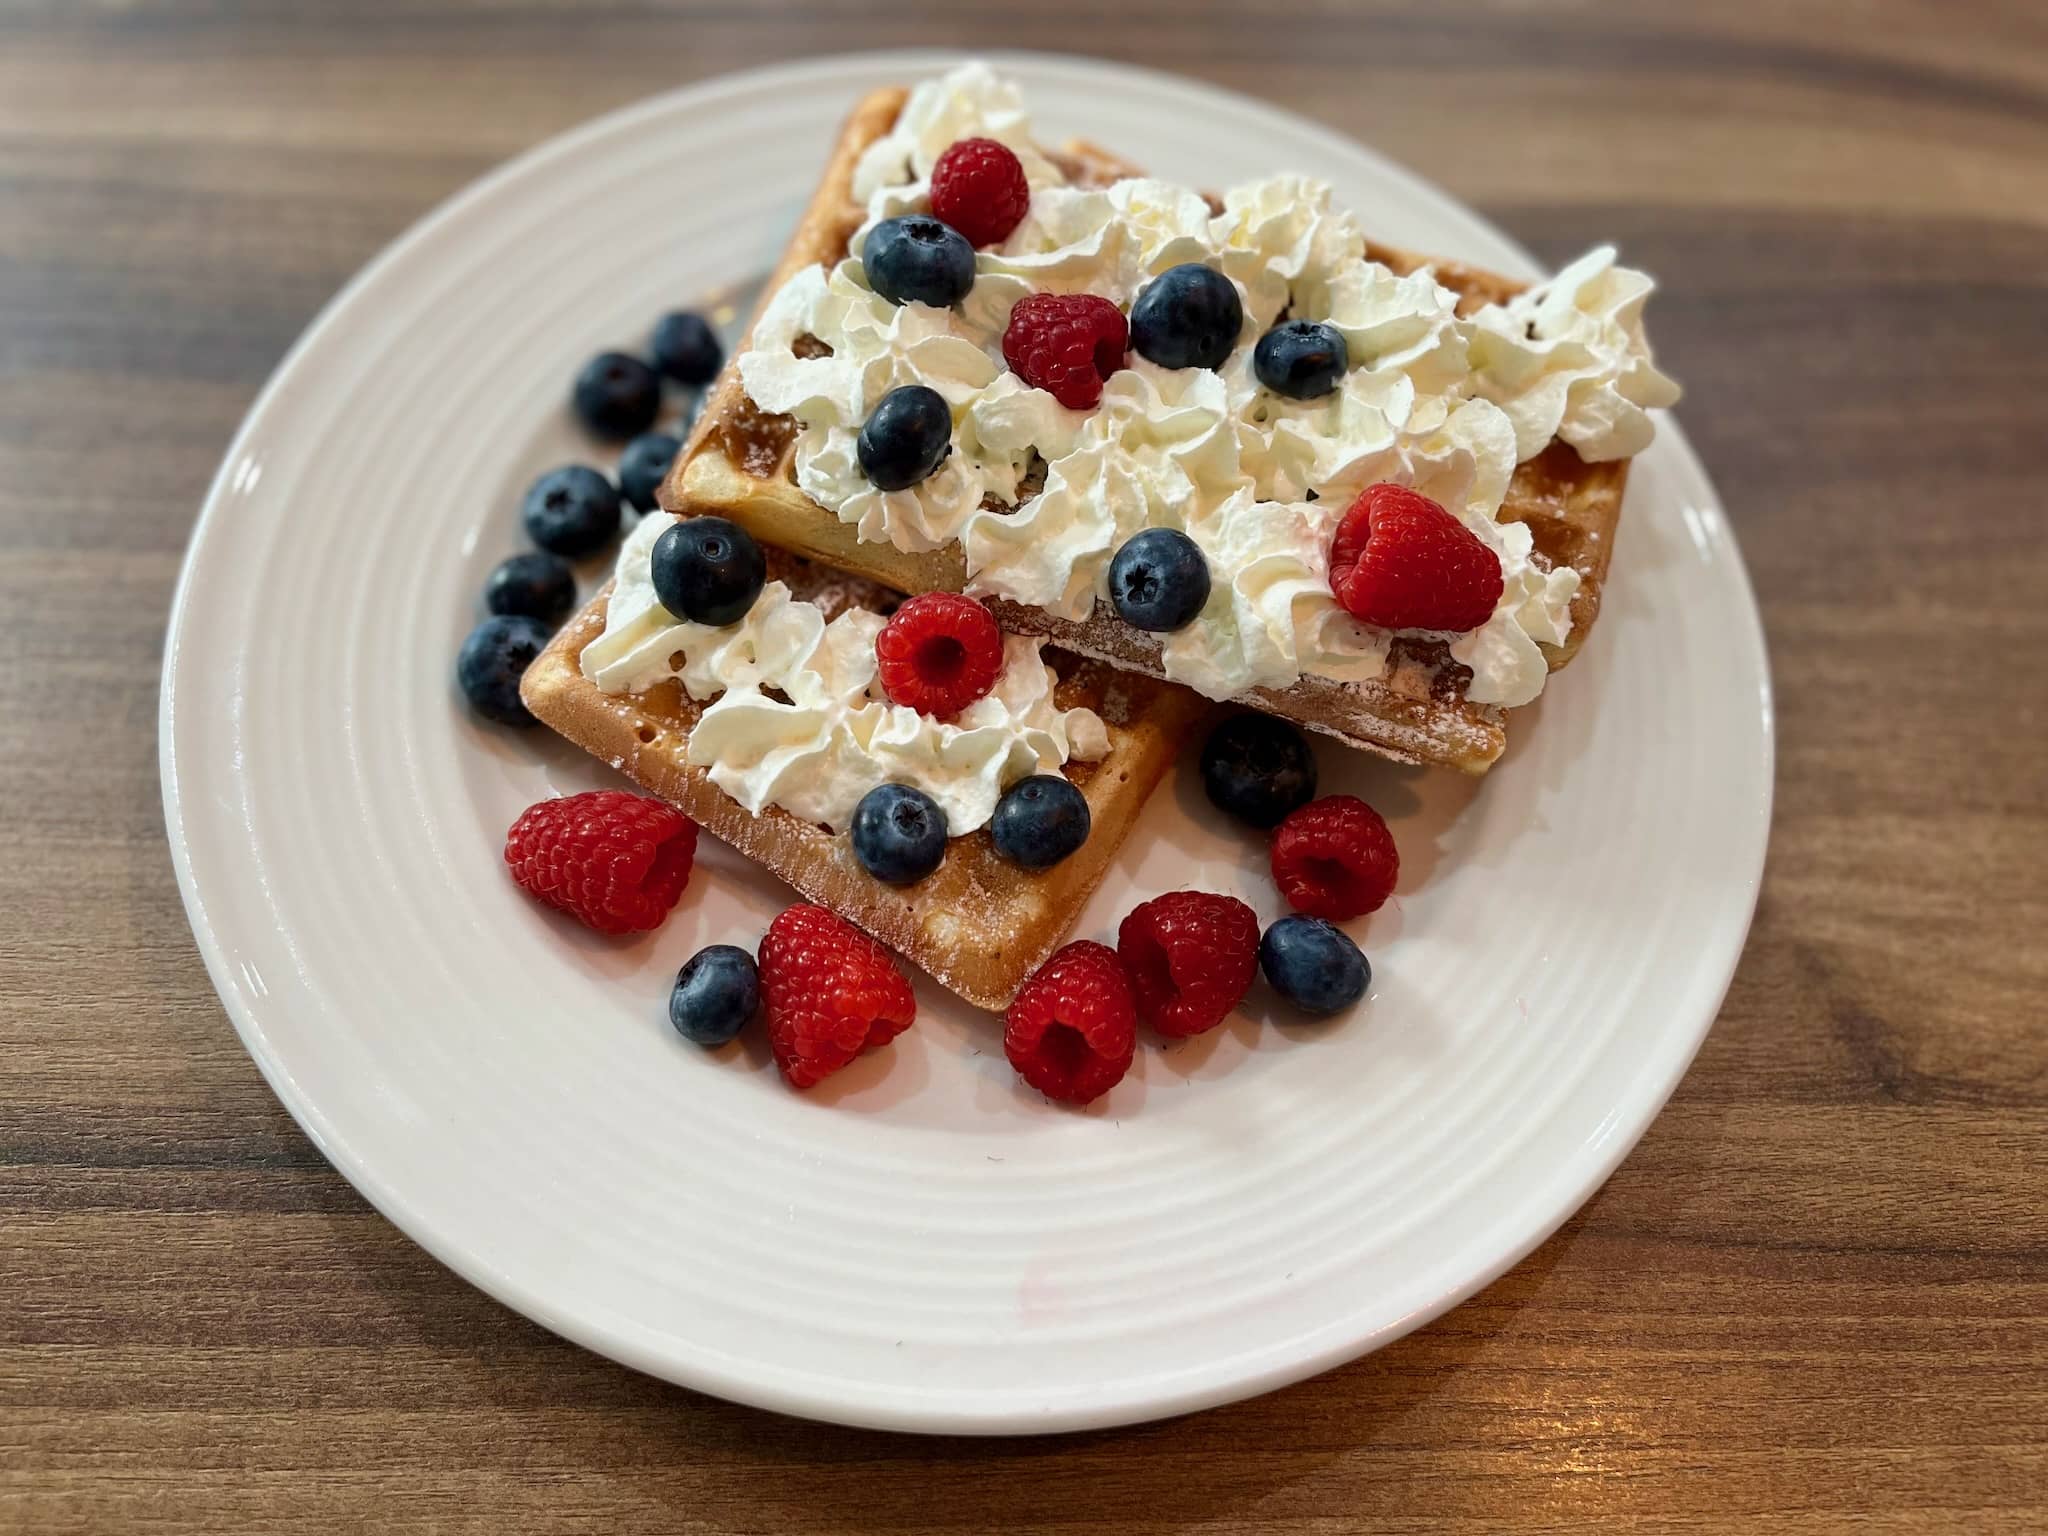 Two waffles on a plate decorated with whipped cream, icing sugar, blueberries and raspberries